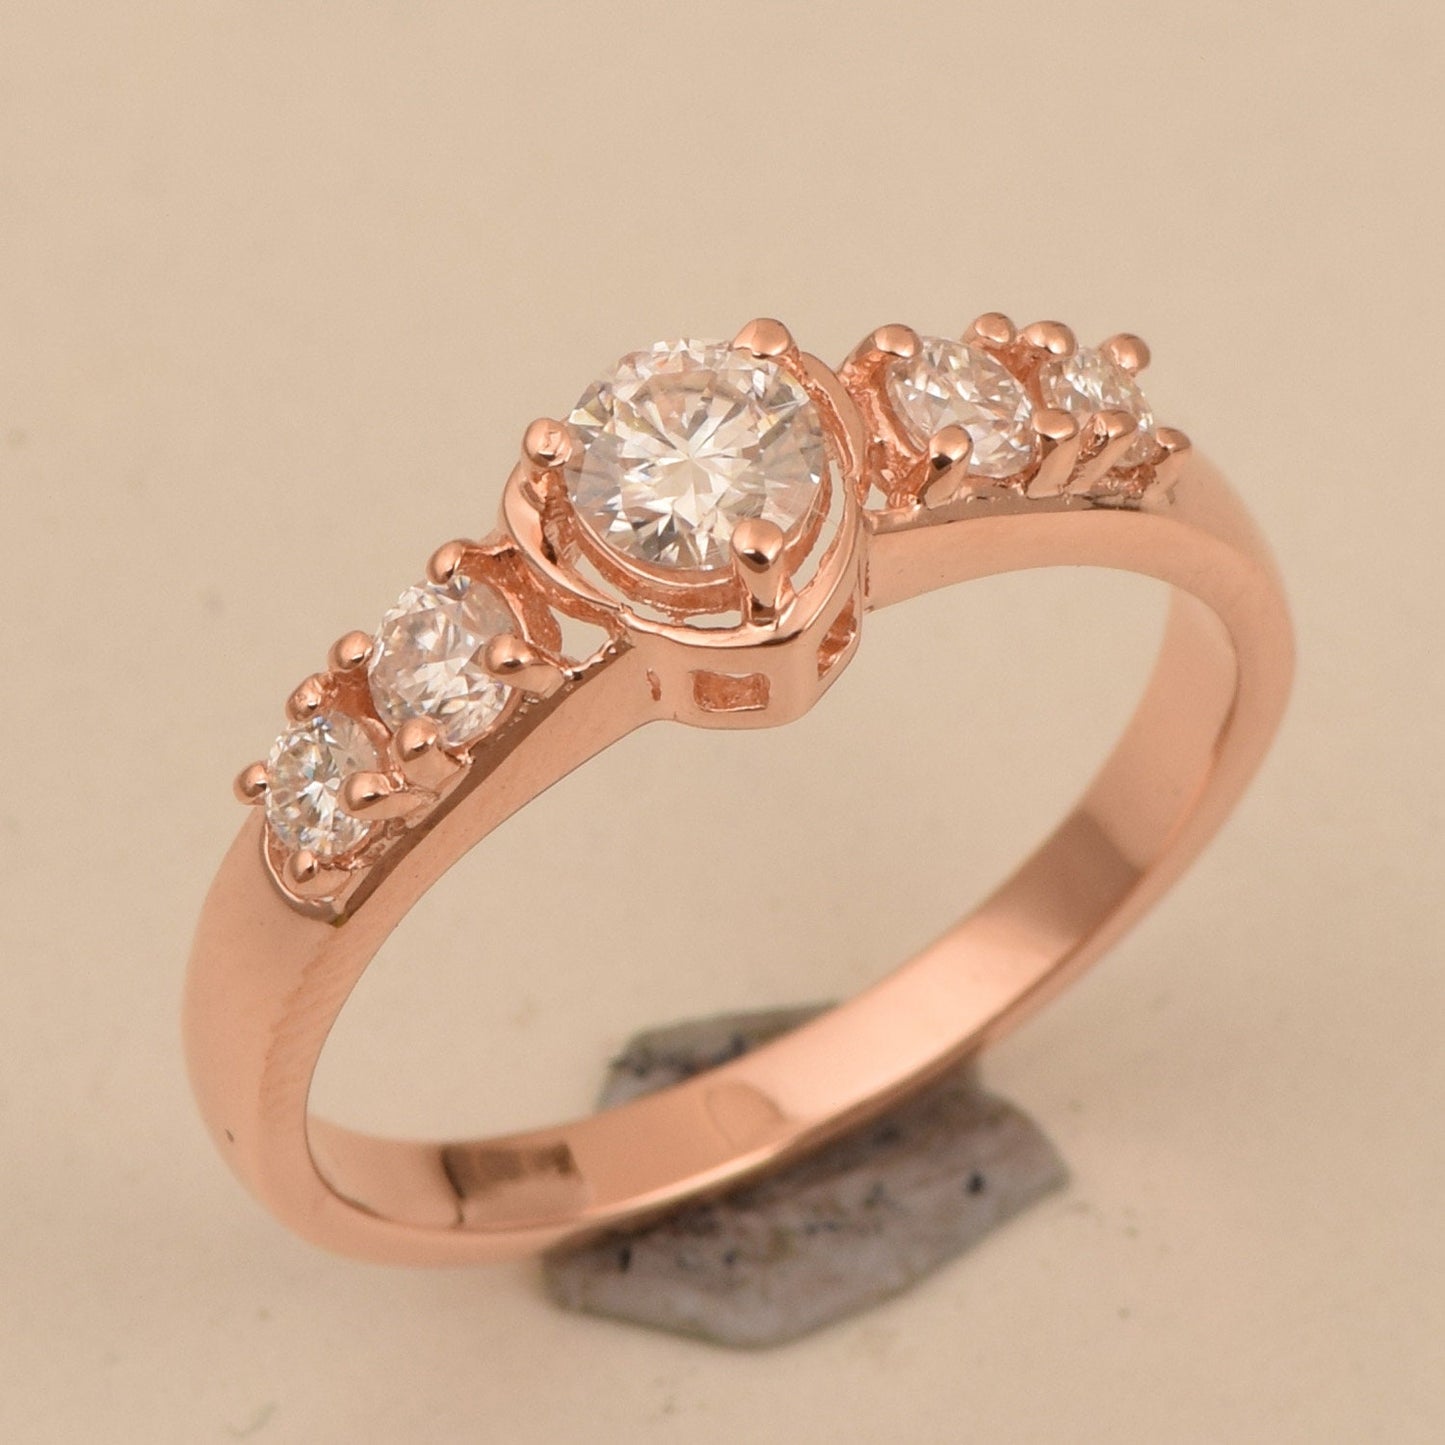 Round moissanite ring with side stones